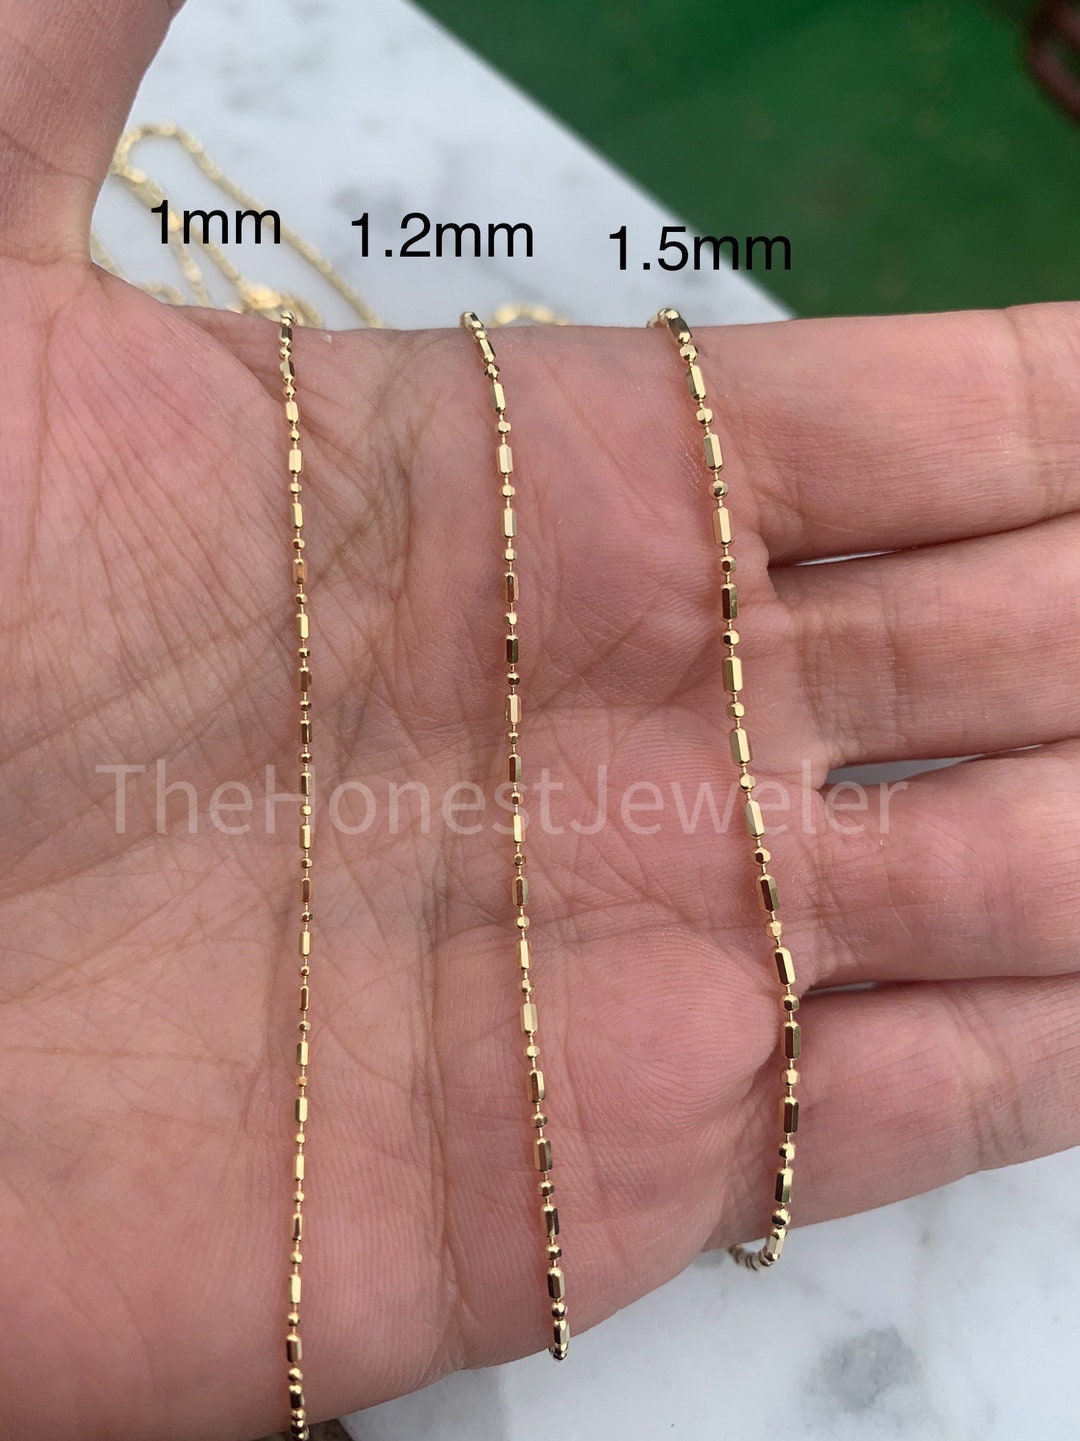 14K Yellow Gold 1mm Bar and Ball Bead Chain